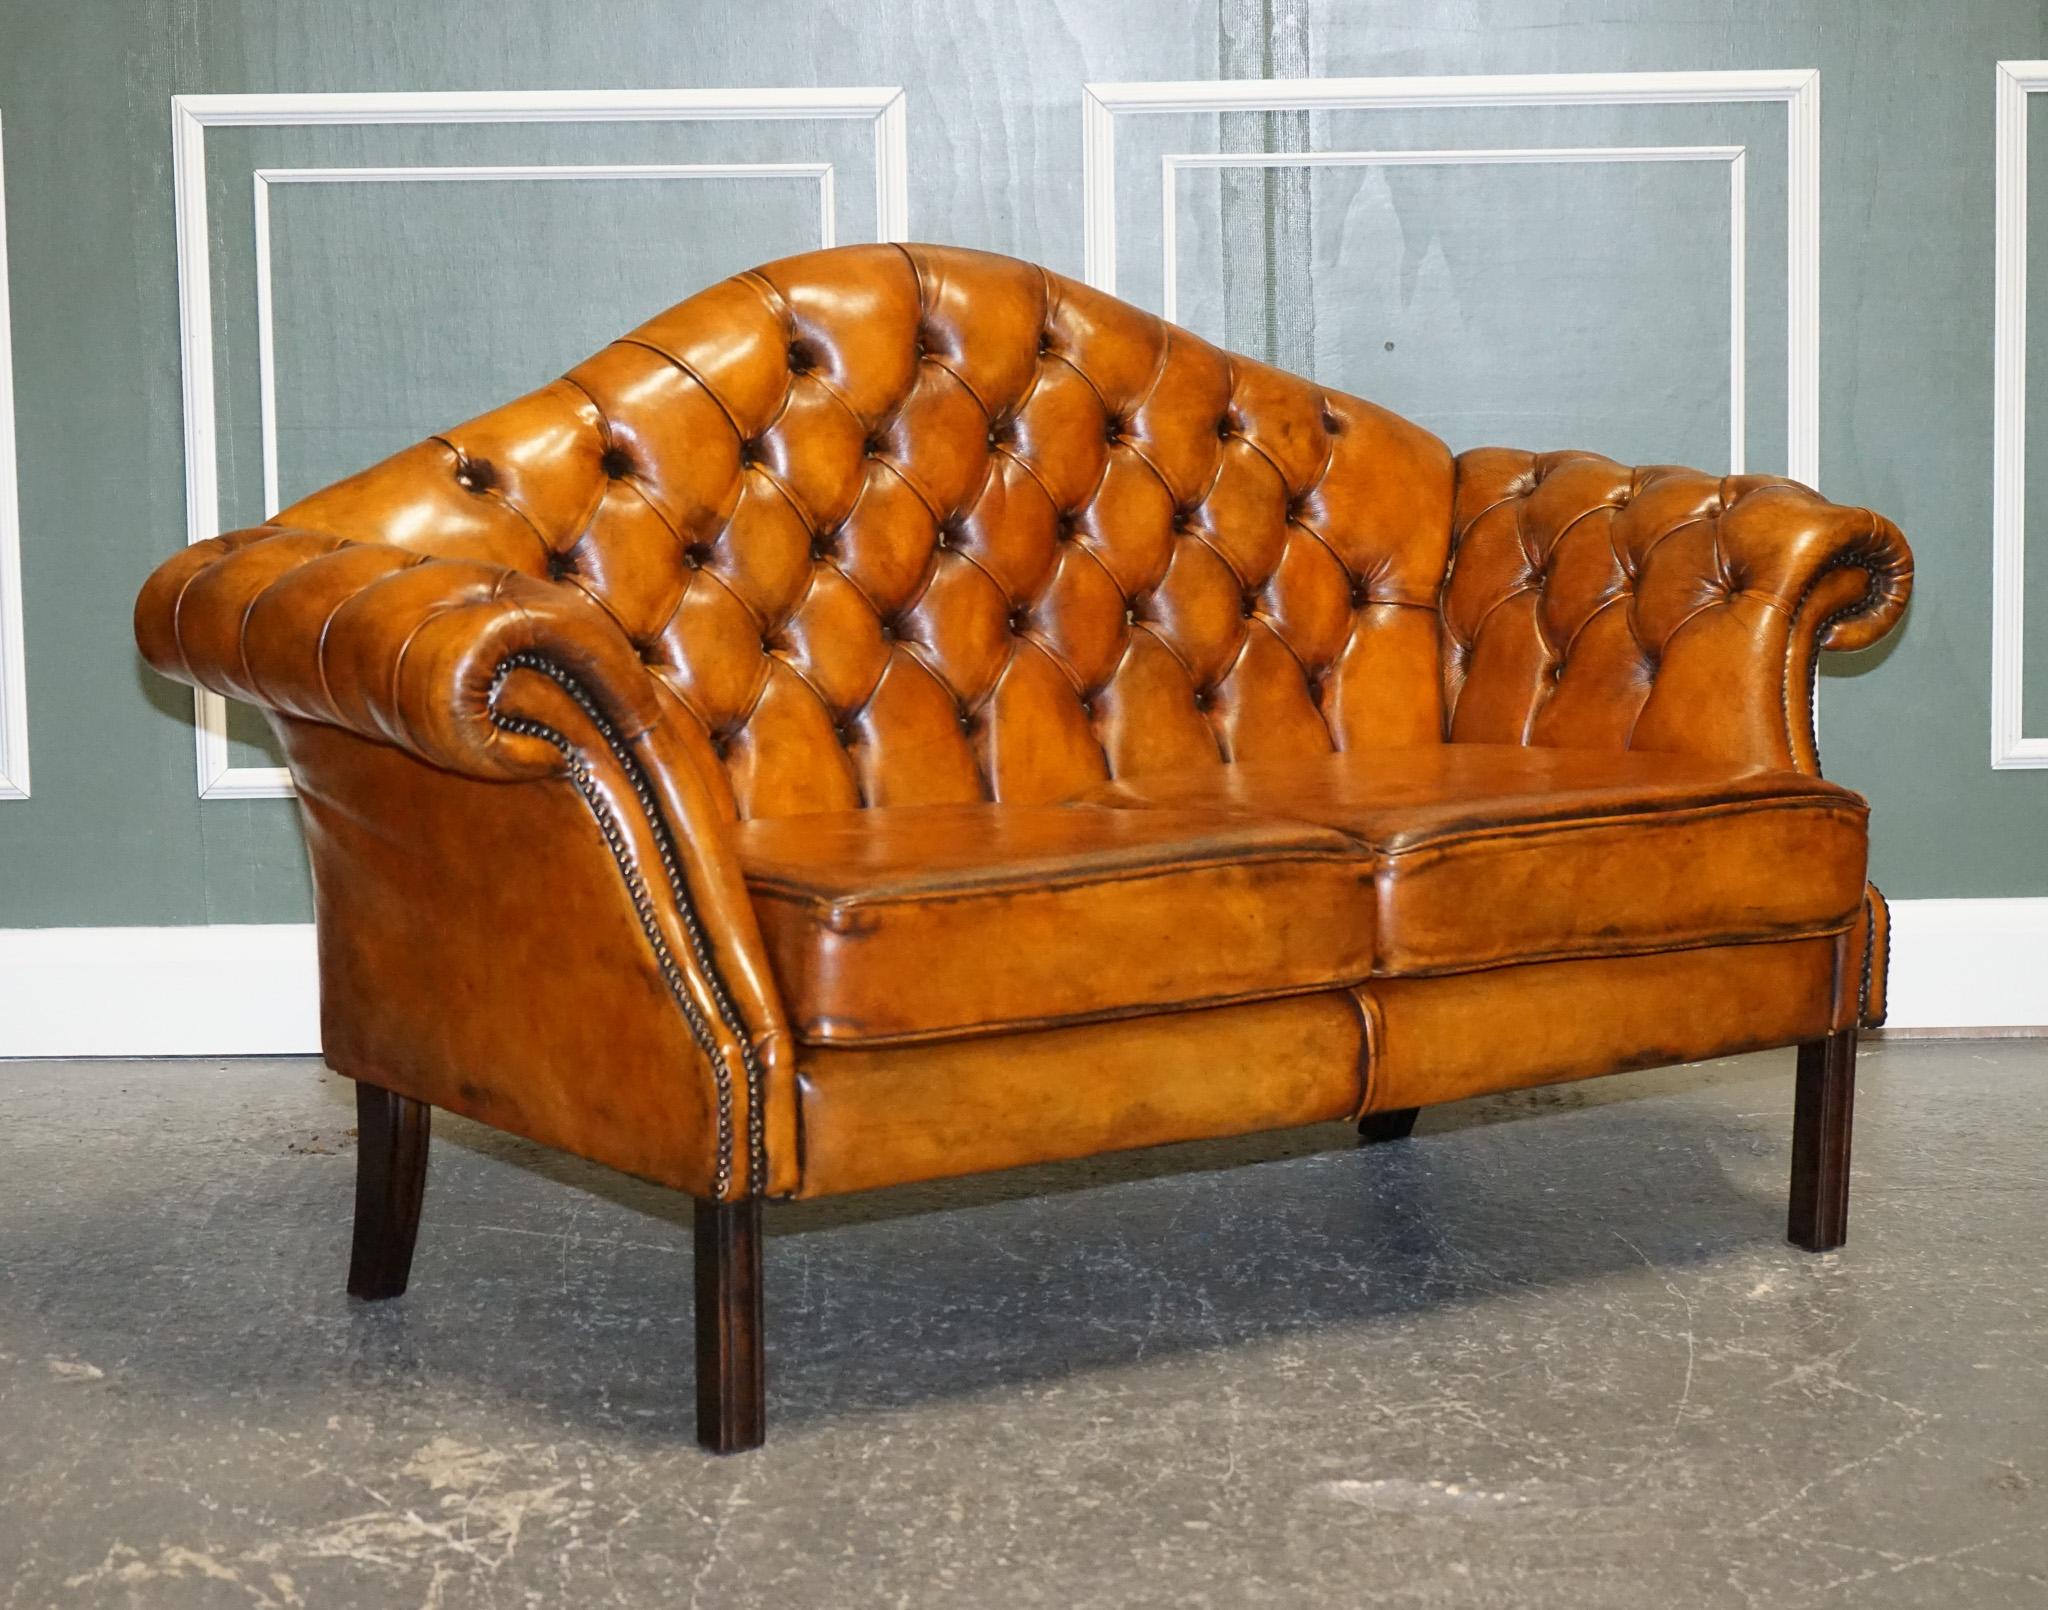 We are excited to present this vintage cigar brown hand-dyed leather camel back chesterfield two seater sofa.

A very classic design with a lovely colour.
The sofa is fully buttoned, only not the seat cushions.
The leather has been washed back,